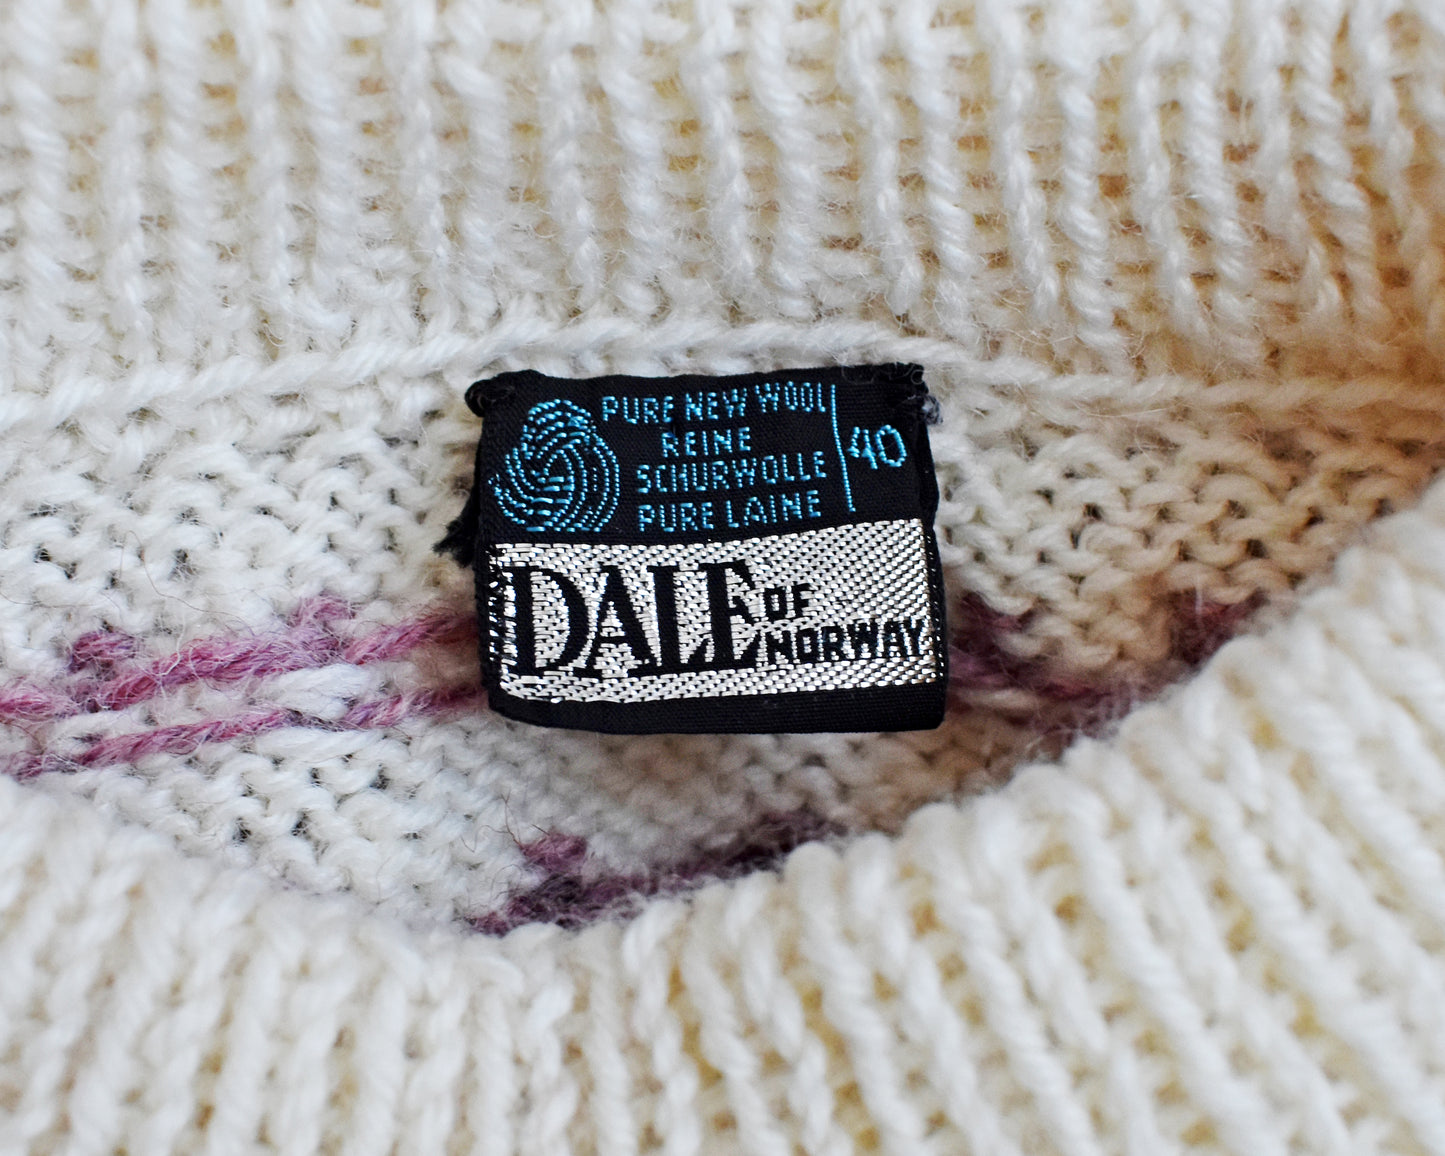 Close up of the tag which says Dale of Norway